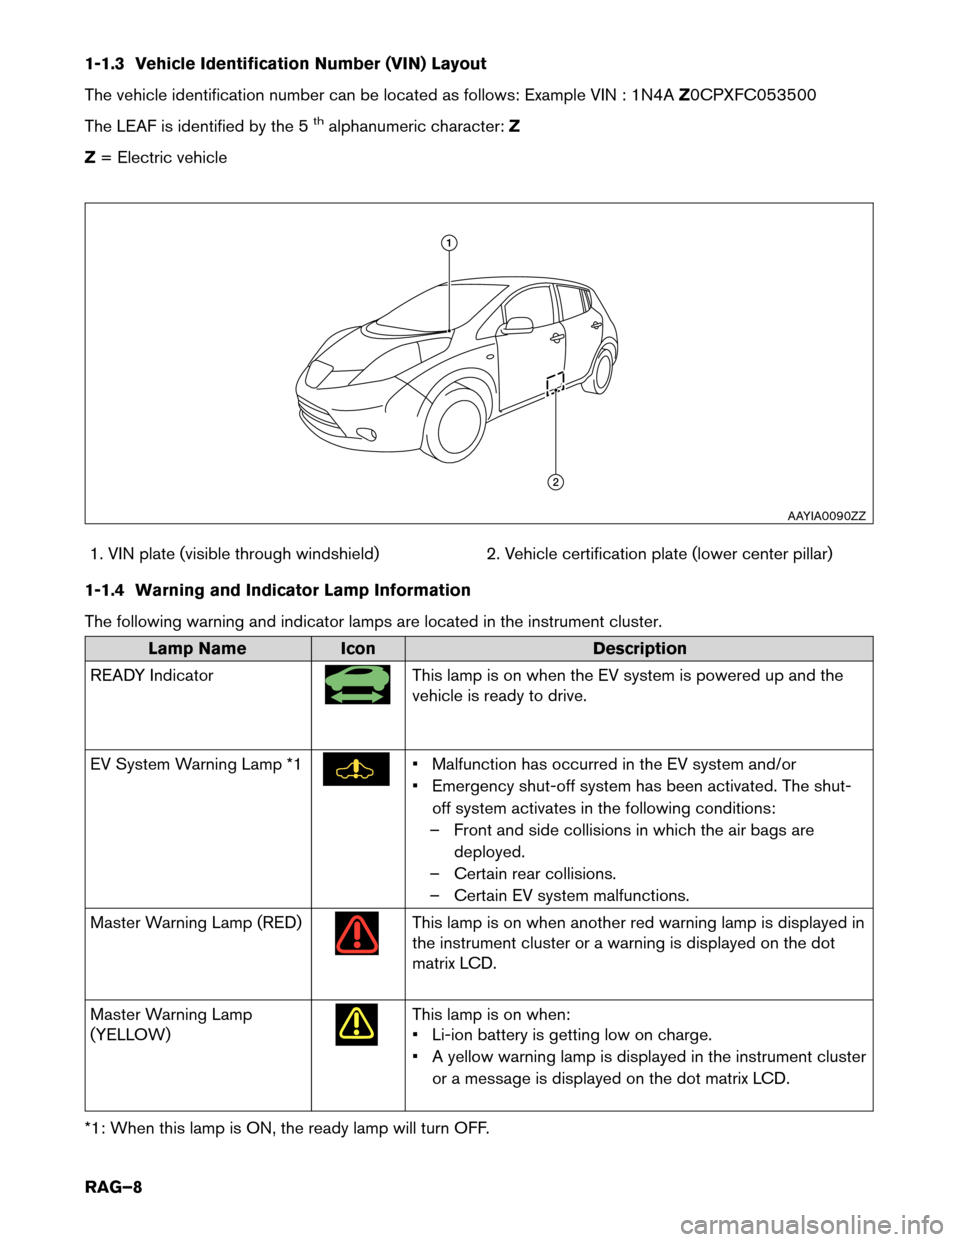 NISSAN LEAF 2015 1.G Roadside Assistance Guide 1-1.3 Vehicle Identification Number (VIN) Layout
The
vehicle identification number can be located as follows: Example VIN : 1N4A Z0CPXFC053500
The LEAF is identified by the 5
thalphanumeric character: